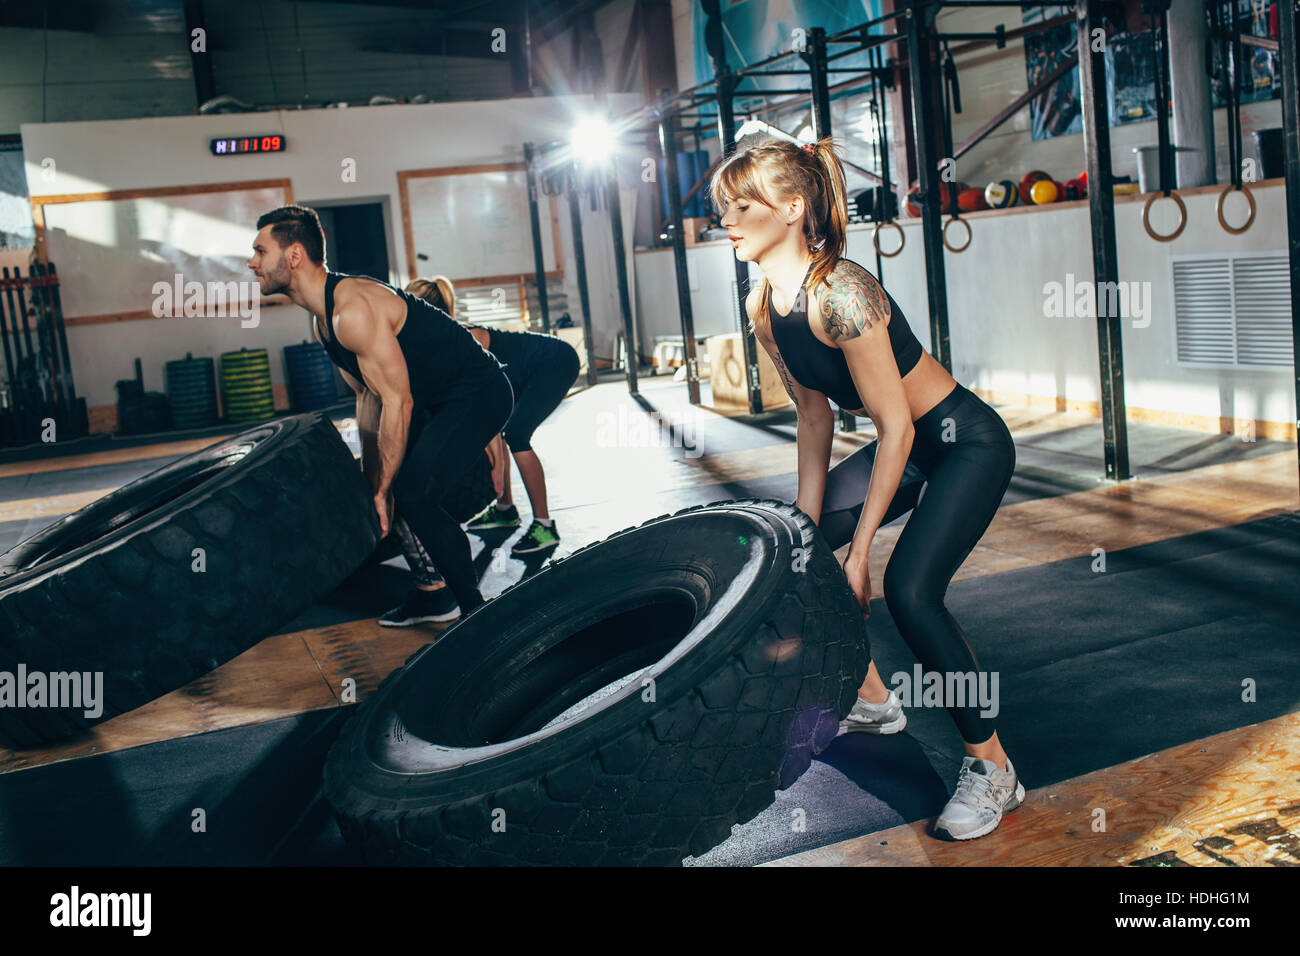 Determined male and female athletes flipping tire at health club Stock Photo